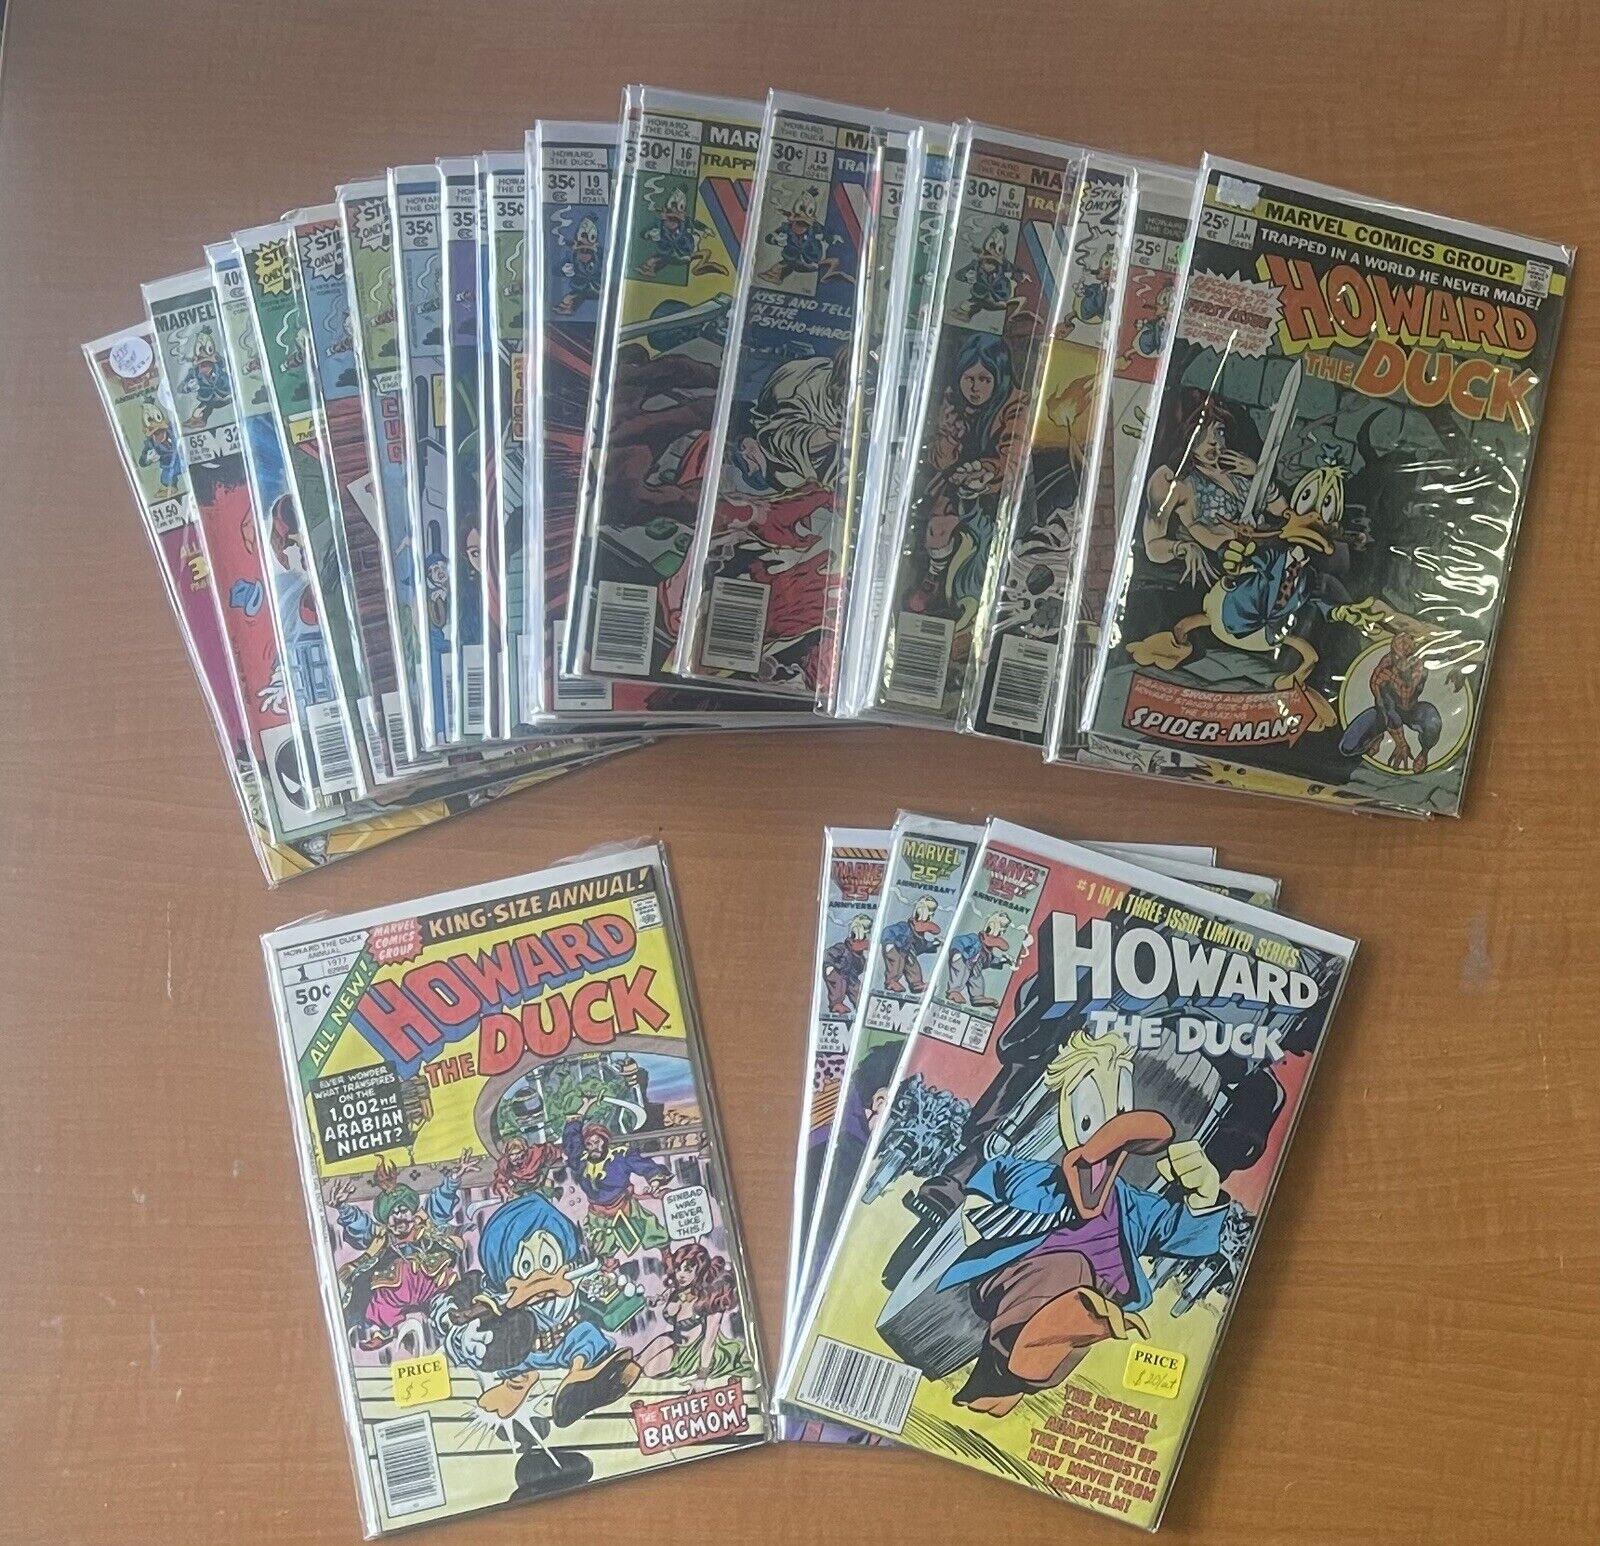 Marvel HOWARD THE DUCK # 1 - 33, Annual 1, & Limited Series 1-3 (1976)